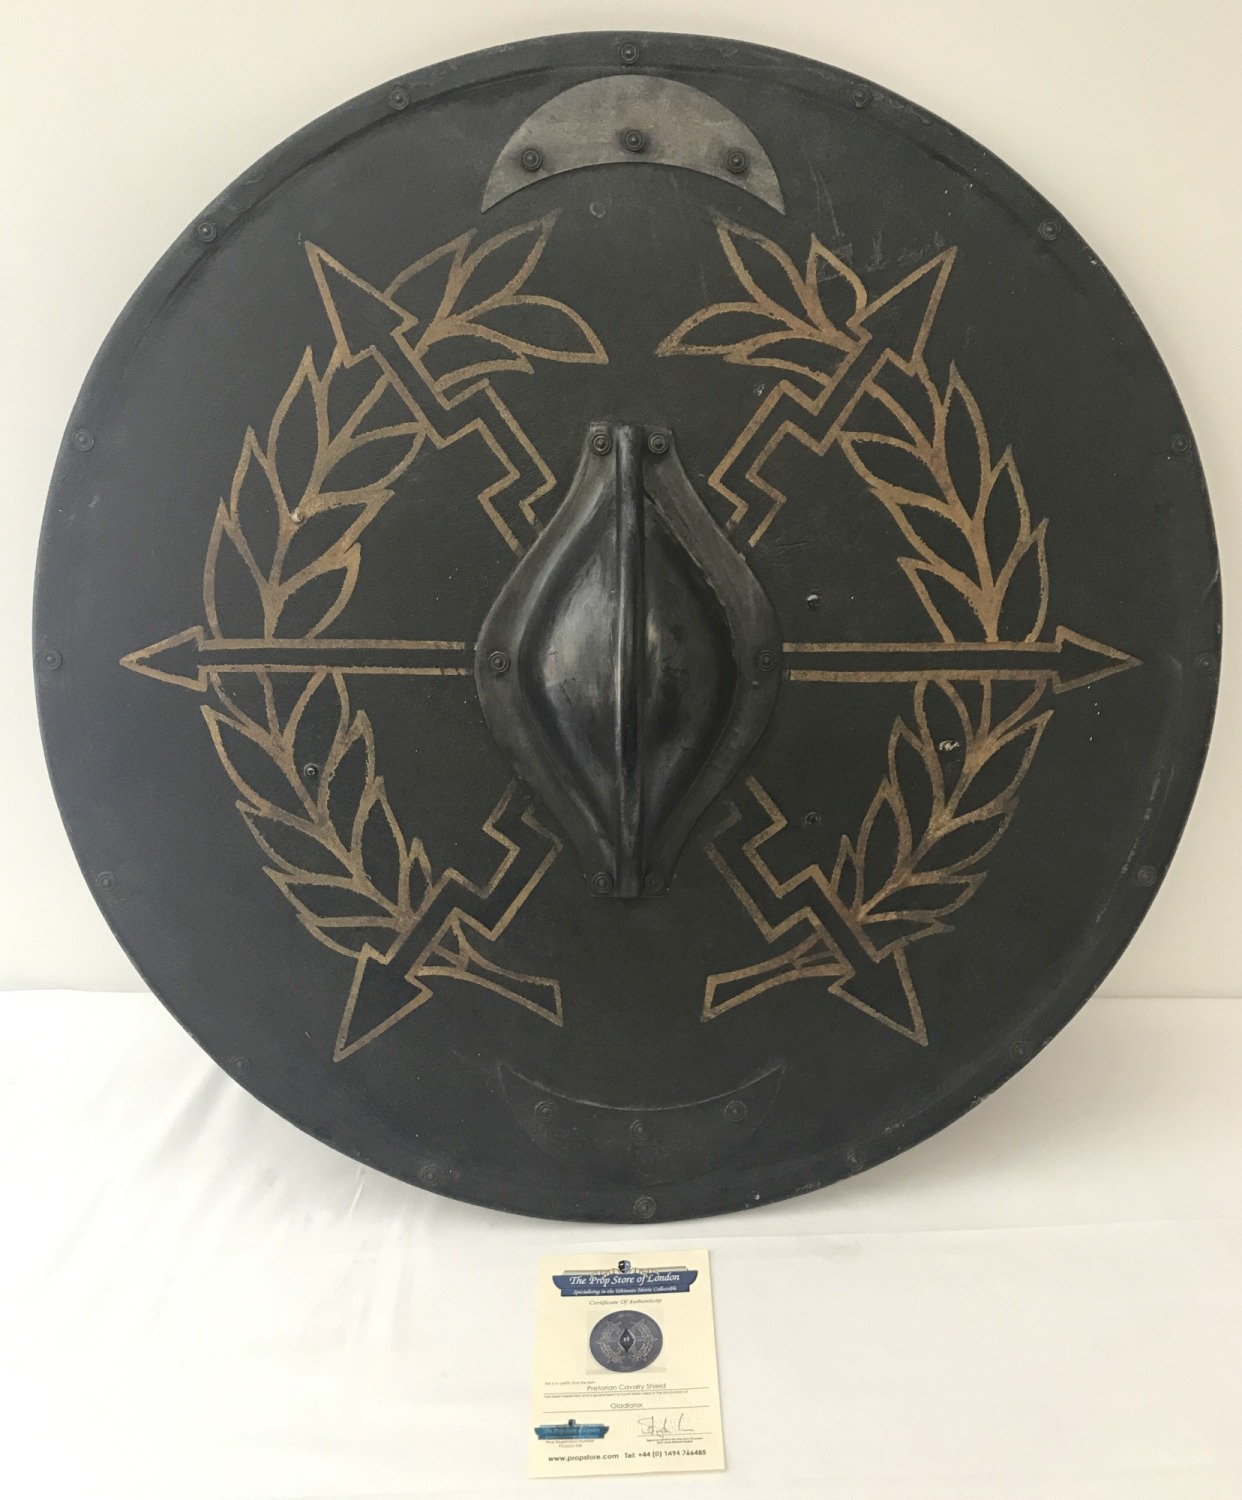 A Pretorian Cavalry Shield used in the 2000 film Gladiator. Complete with CAO.